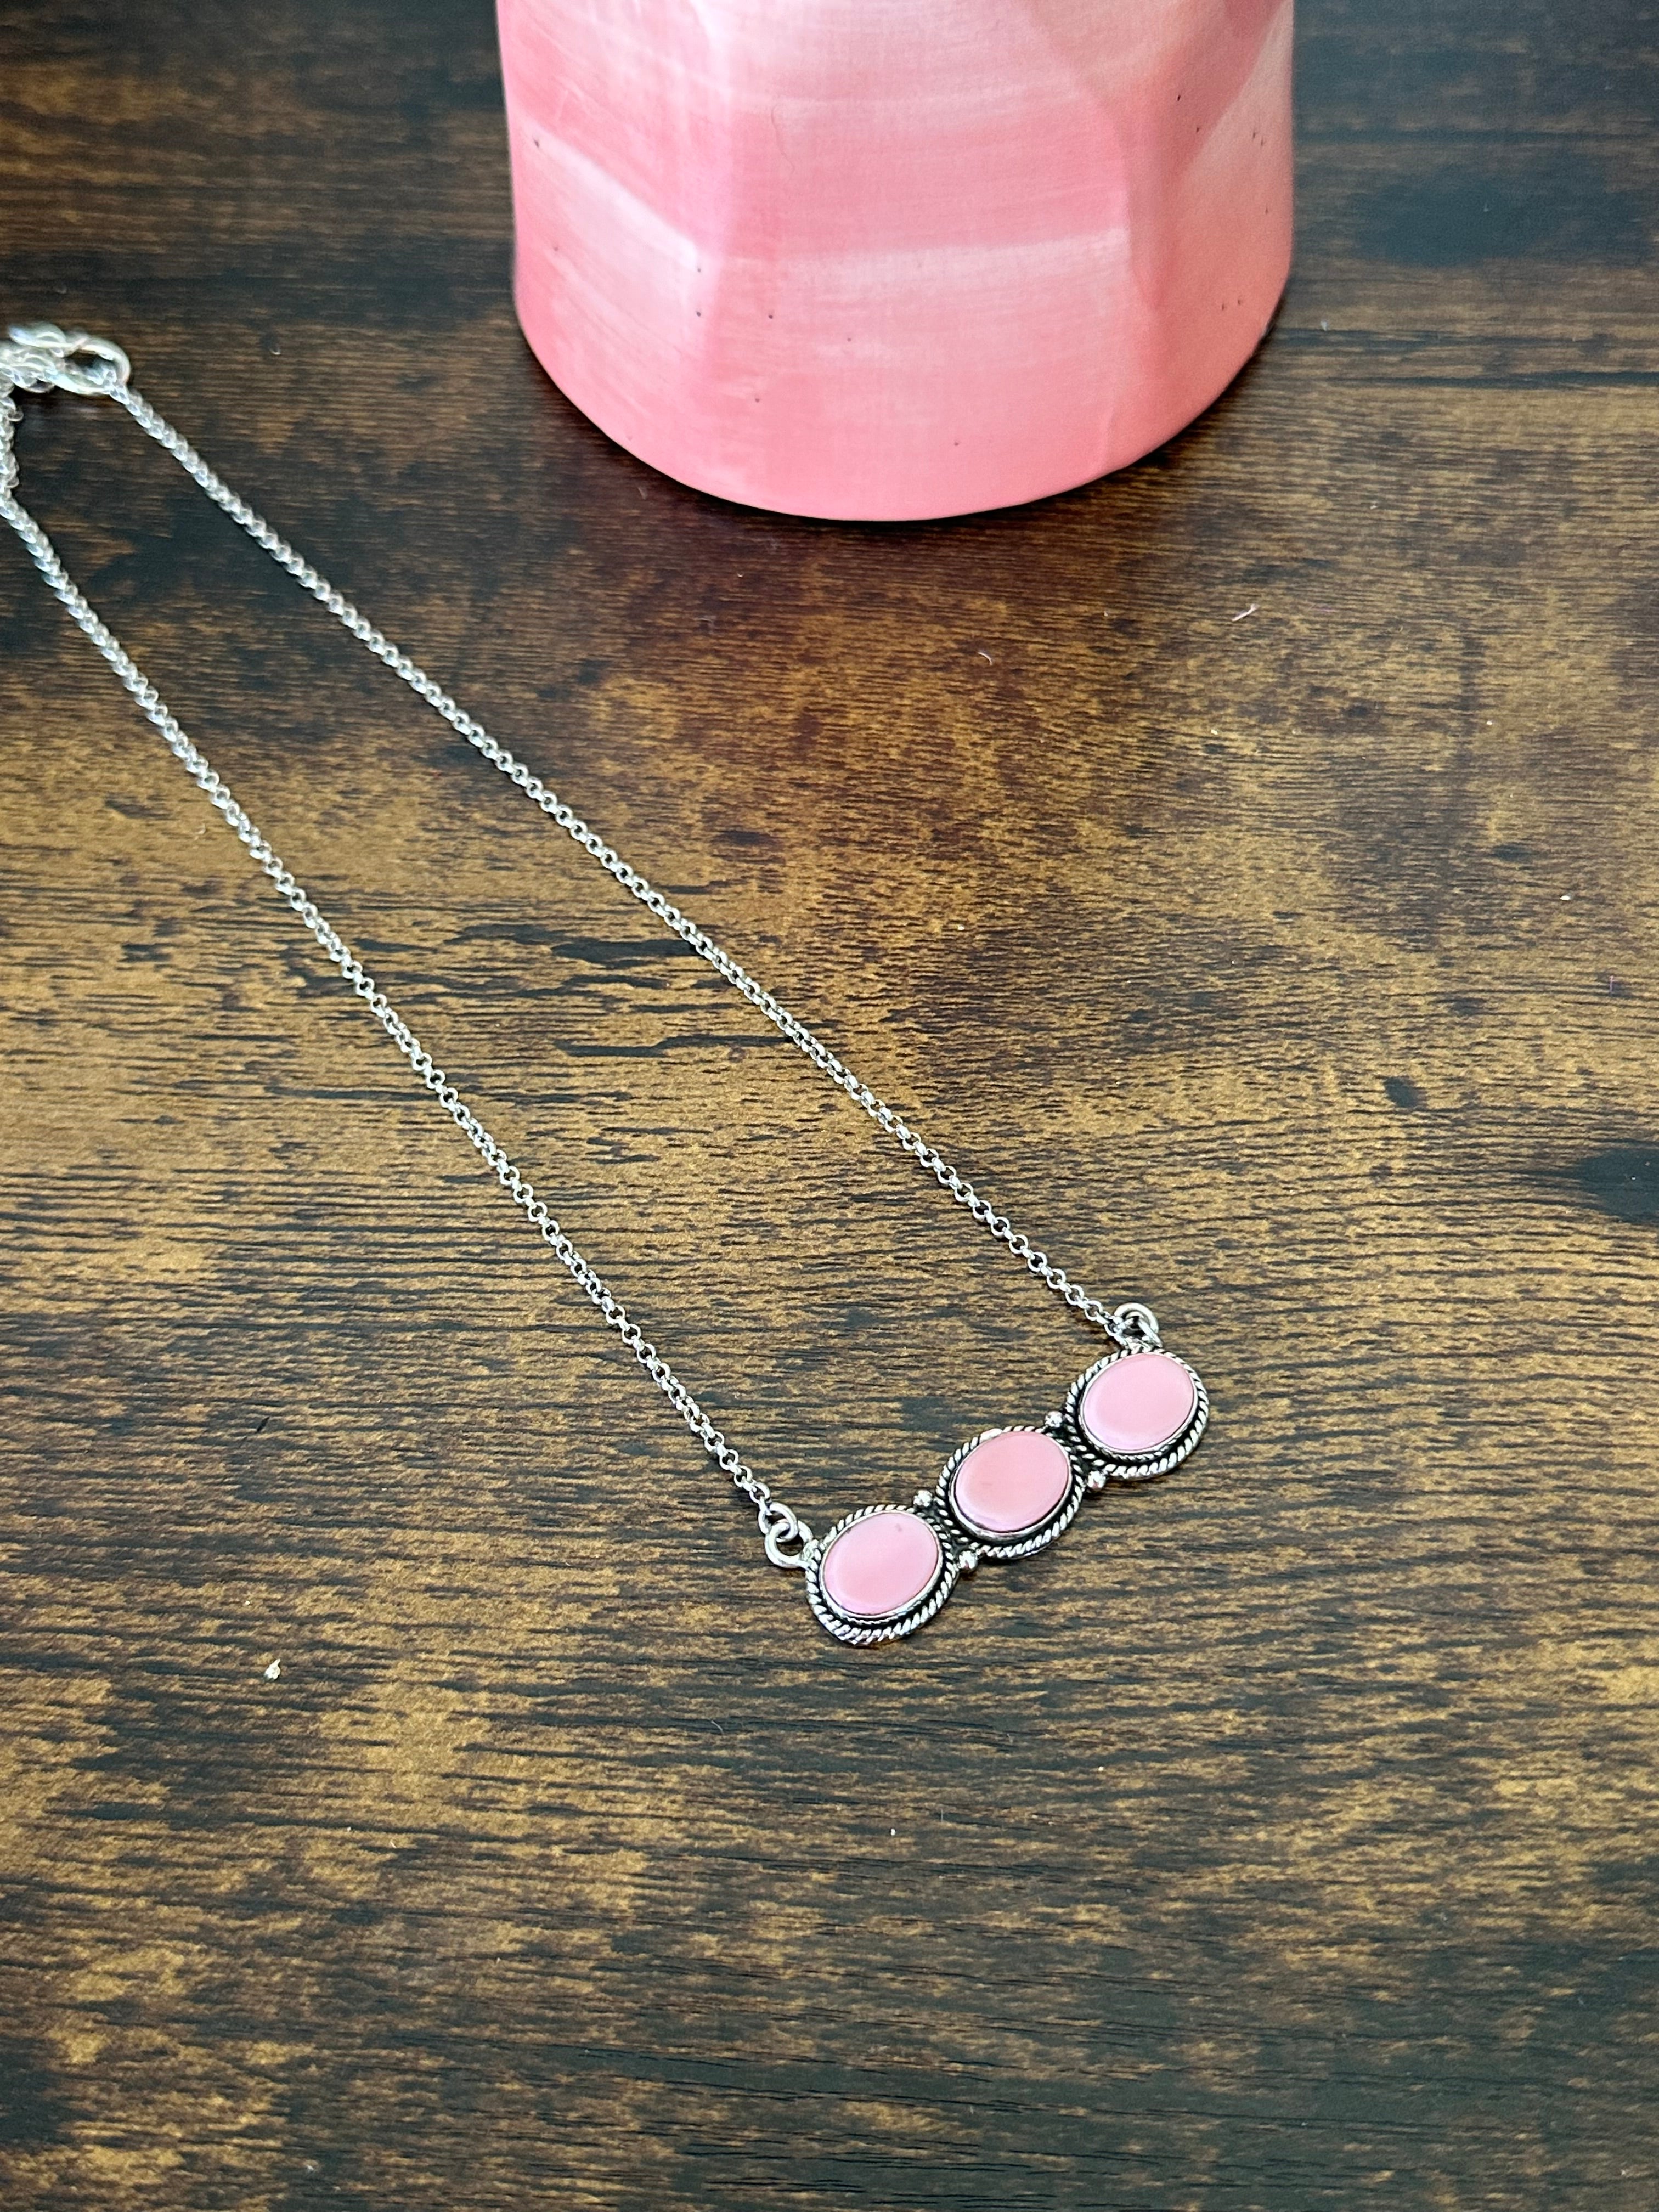 Southwest Handmade Pink Conch & Sterling Silver Bar Necklace